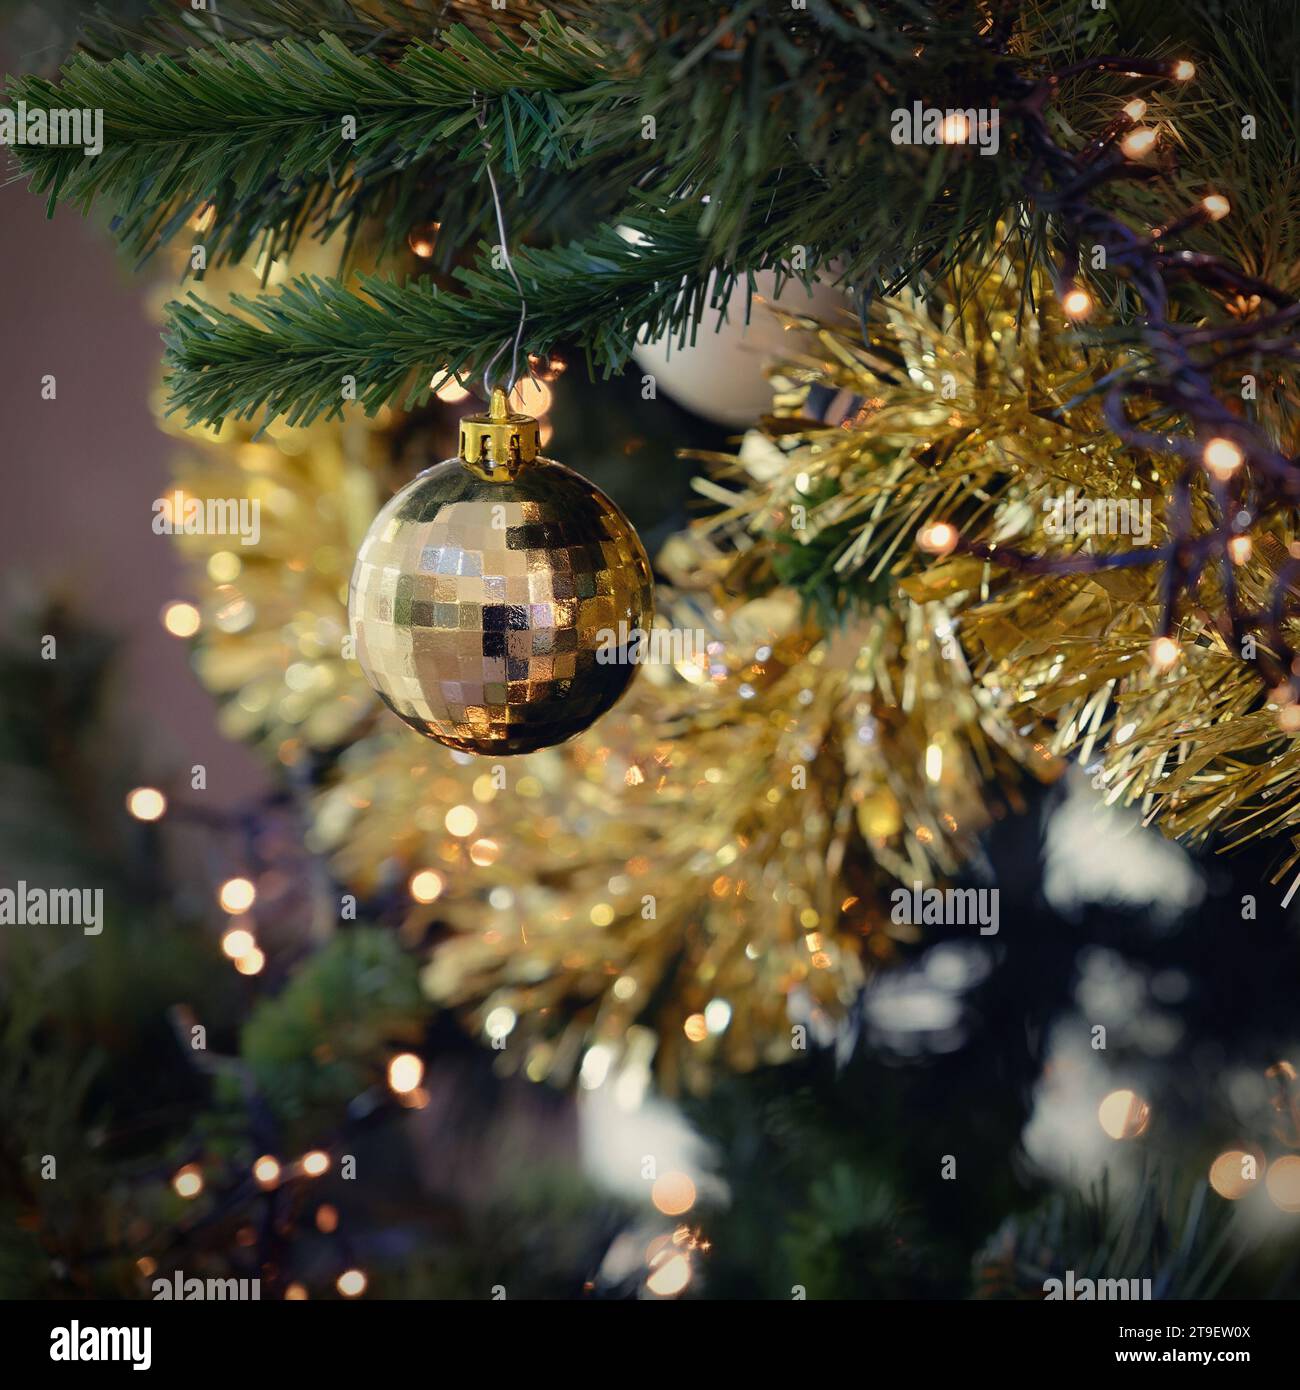 Christmas background. Beautiful colorful decorations on the Christmas tree with lights. Abstract concept for holidays and winter time. Stock Photo